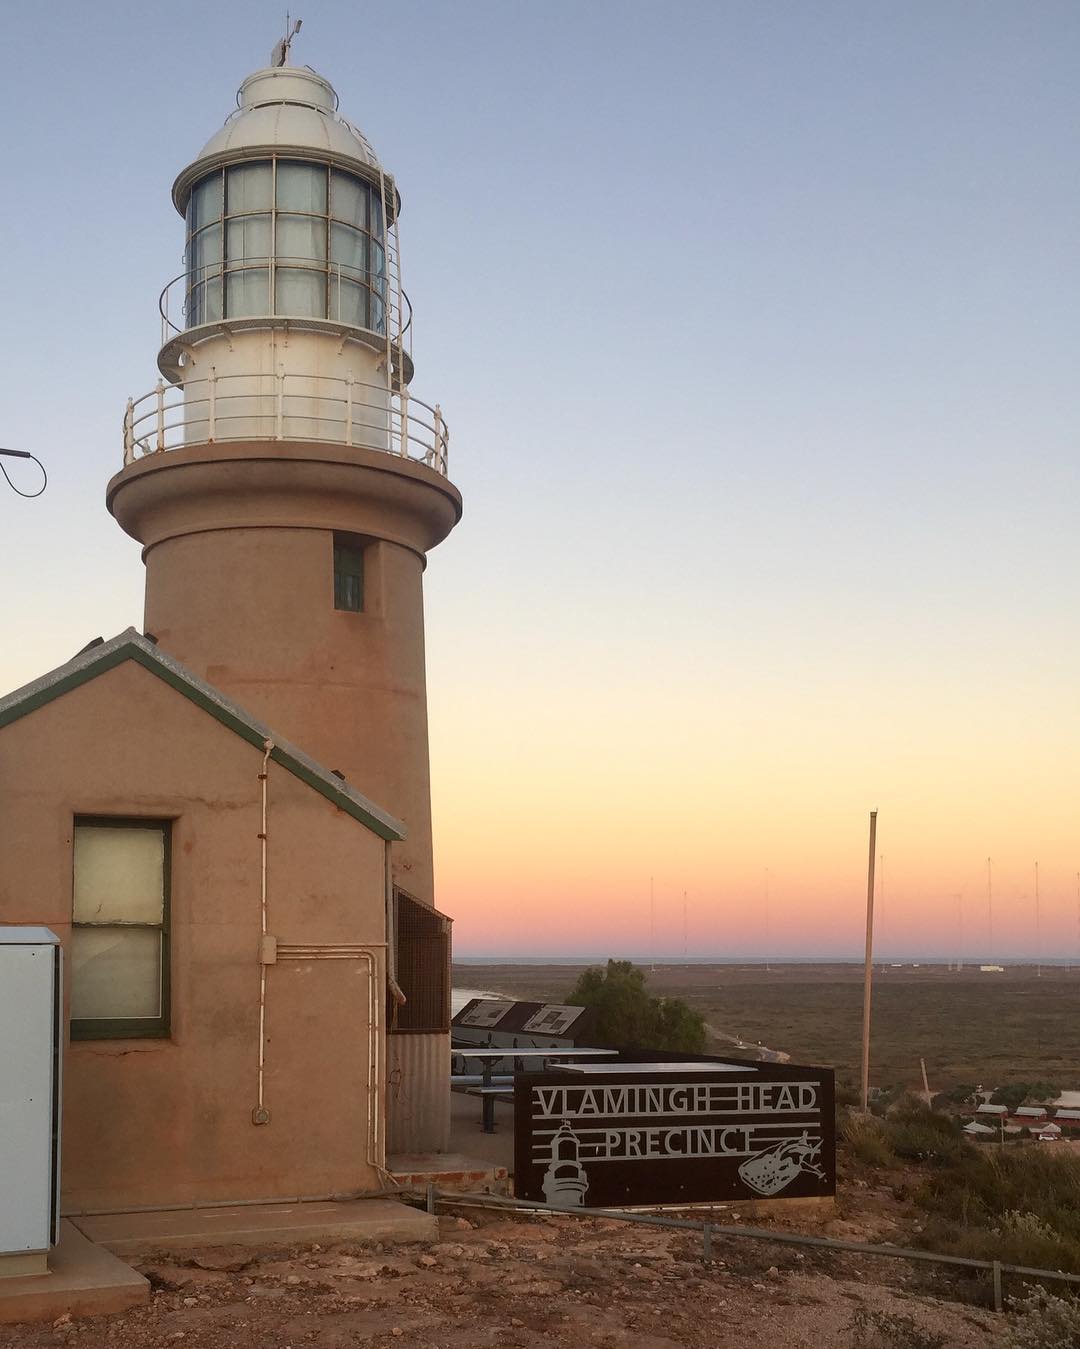 Exmouth, WA, Australia 🇦🇺.
.
Sunset at Vlaming Head Lighthouse at the tip of the peninsula. Built in 1912 after the sinking of the SS Mildura it was operational until 1967. It is now an incredible place to watch the sun dip below the horizon.
.
#travel #vlaming #lighthouse #caperange #exmouth #wa #weaternaustralia #australia #oz #backpack #backpacking #sunset #colours #whynotbus #tour #relax #camping #nofilter